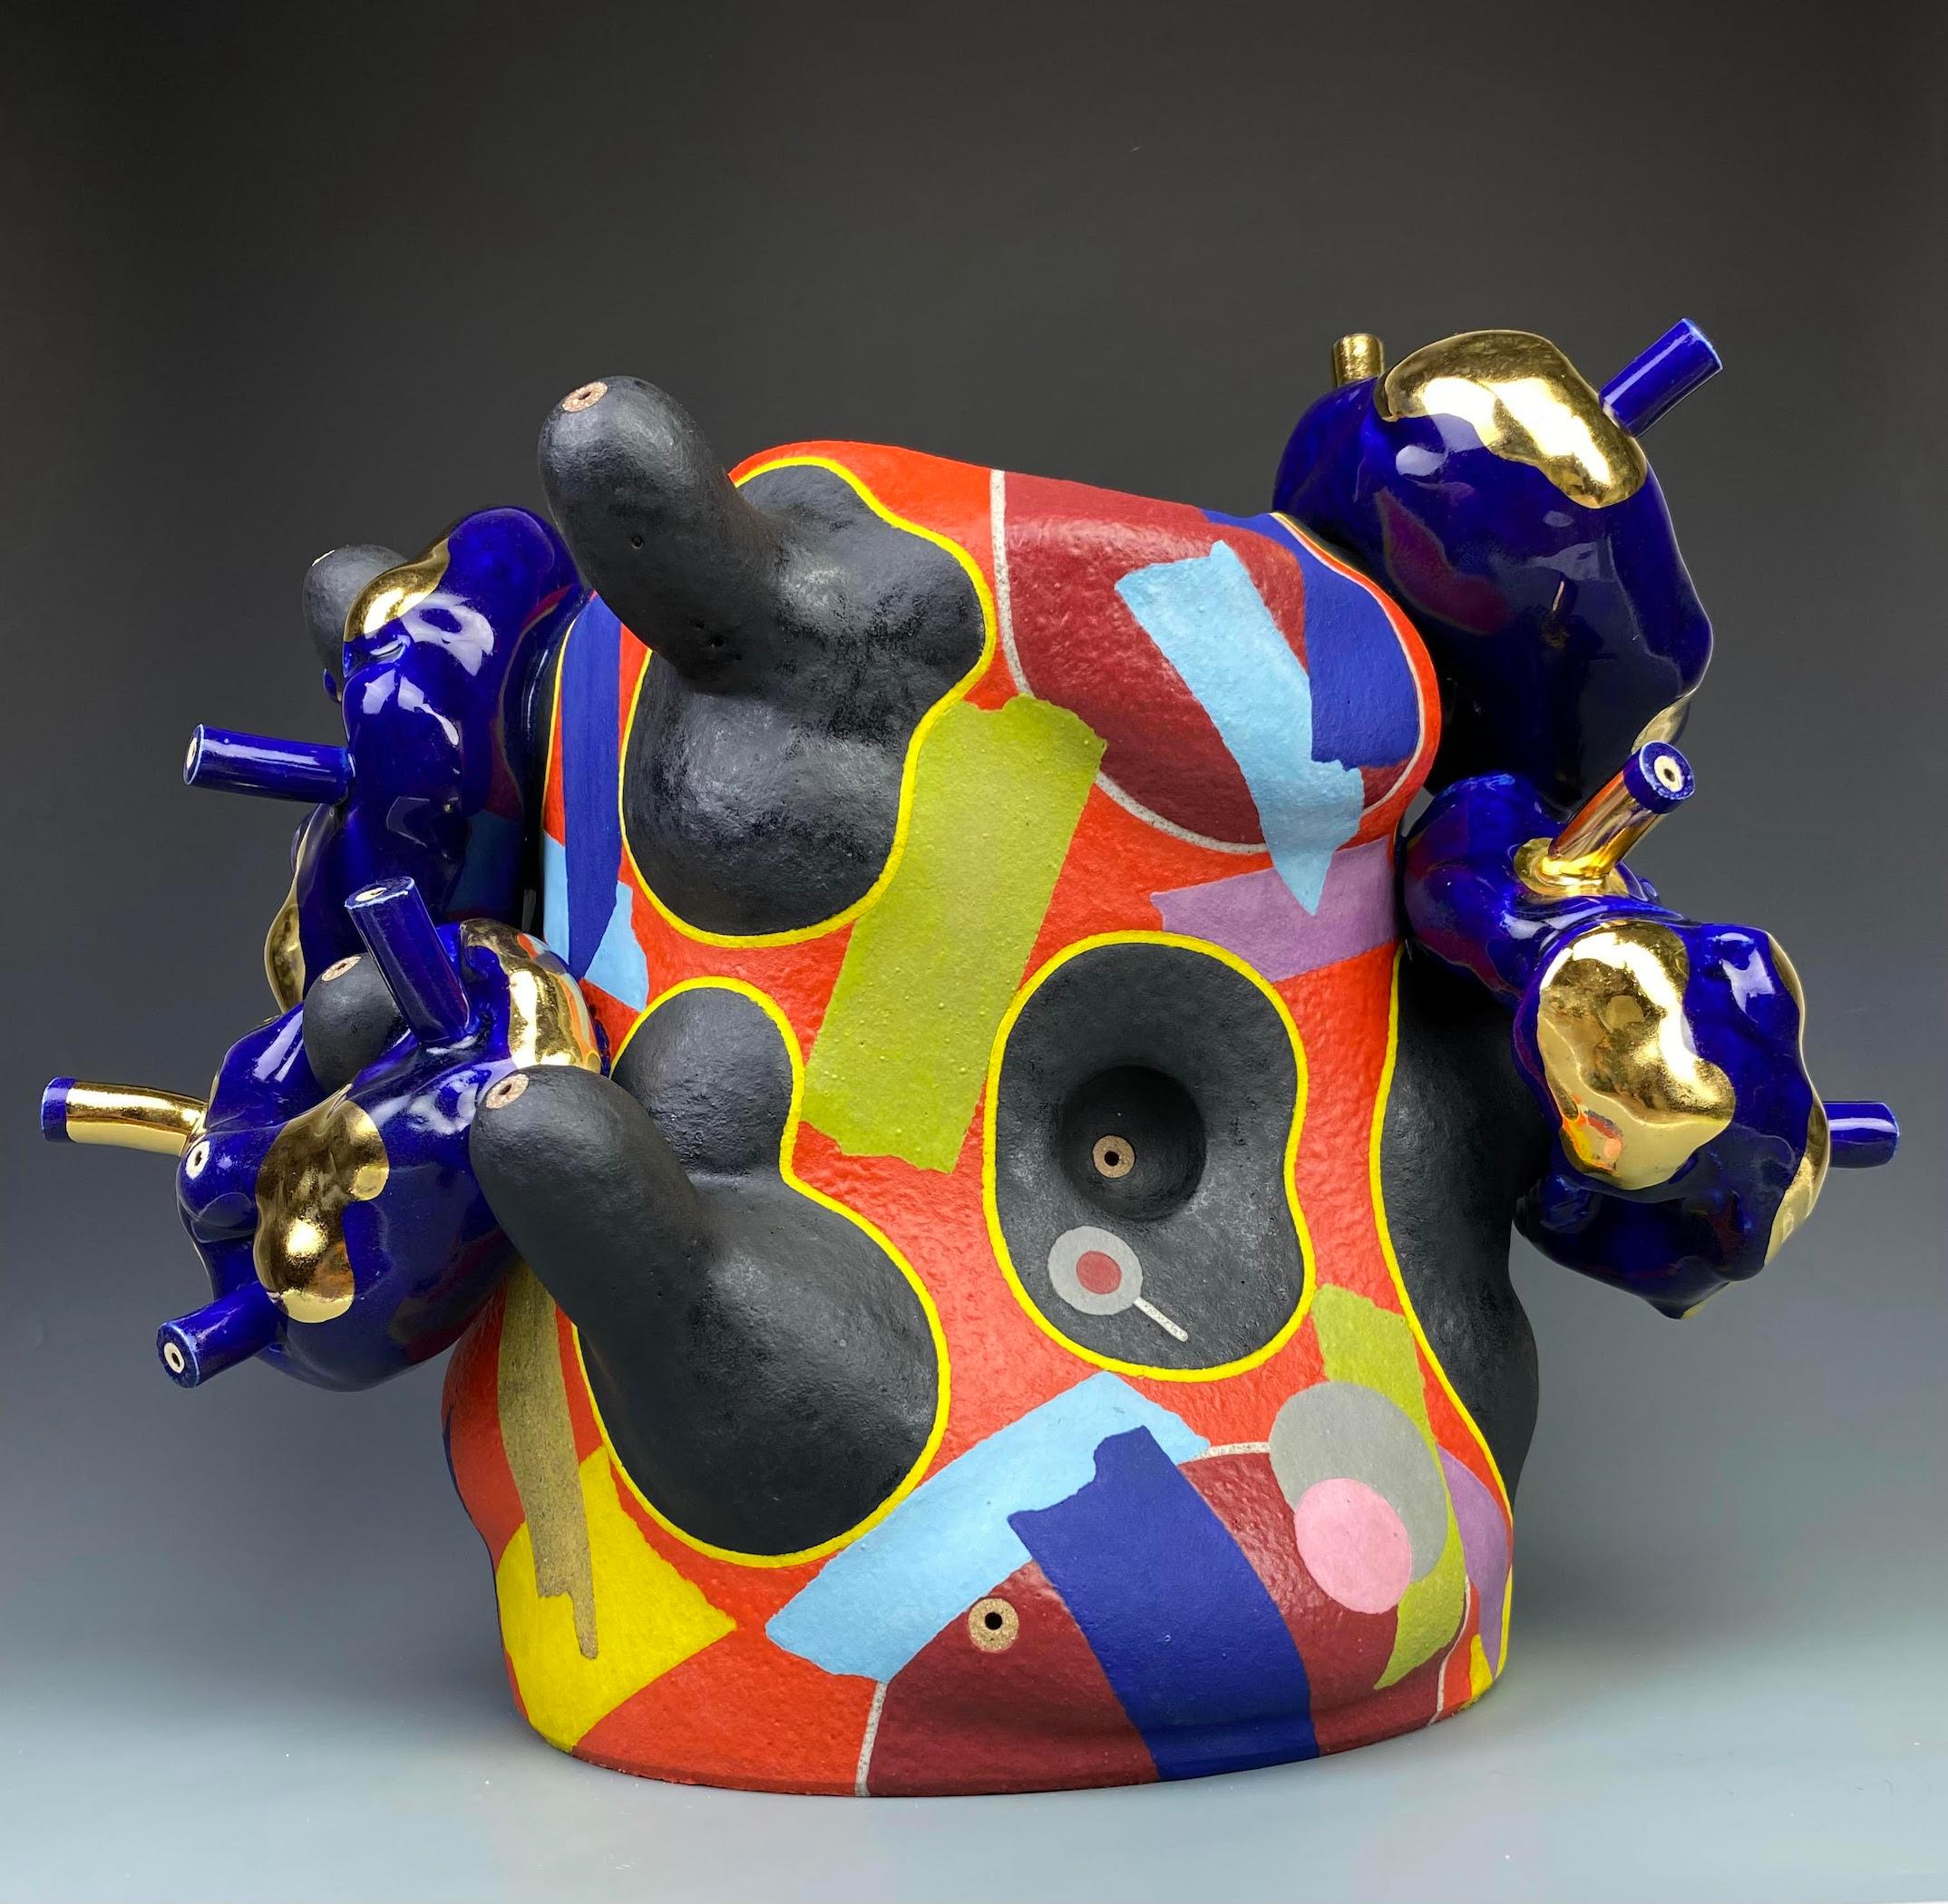 José Sierra is a self-taught artist and ceramicist, born in Mérida, Venezuela in 1975. His work draws inspiration from his  heritage, along with pre-Hispanic art, East Asian pottery, and contemporary design. His work teems with super-saturated